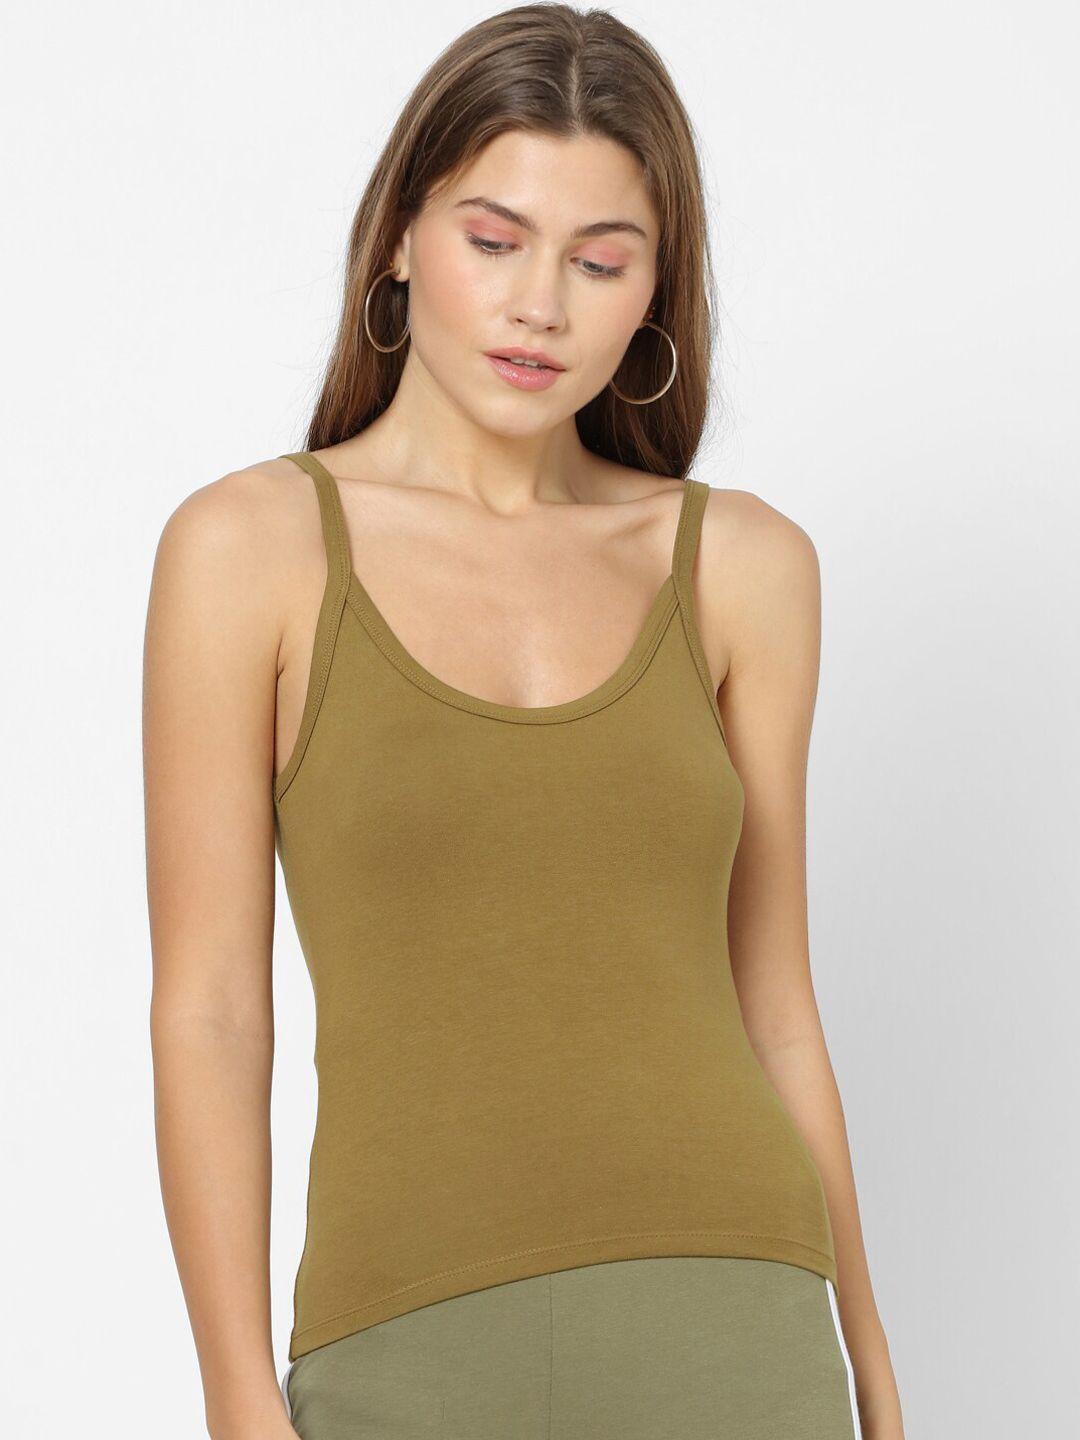 forever-21-women-olive-green-solid-tank-top